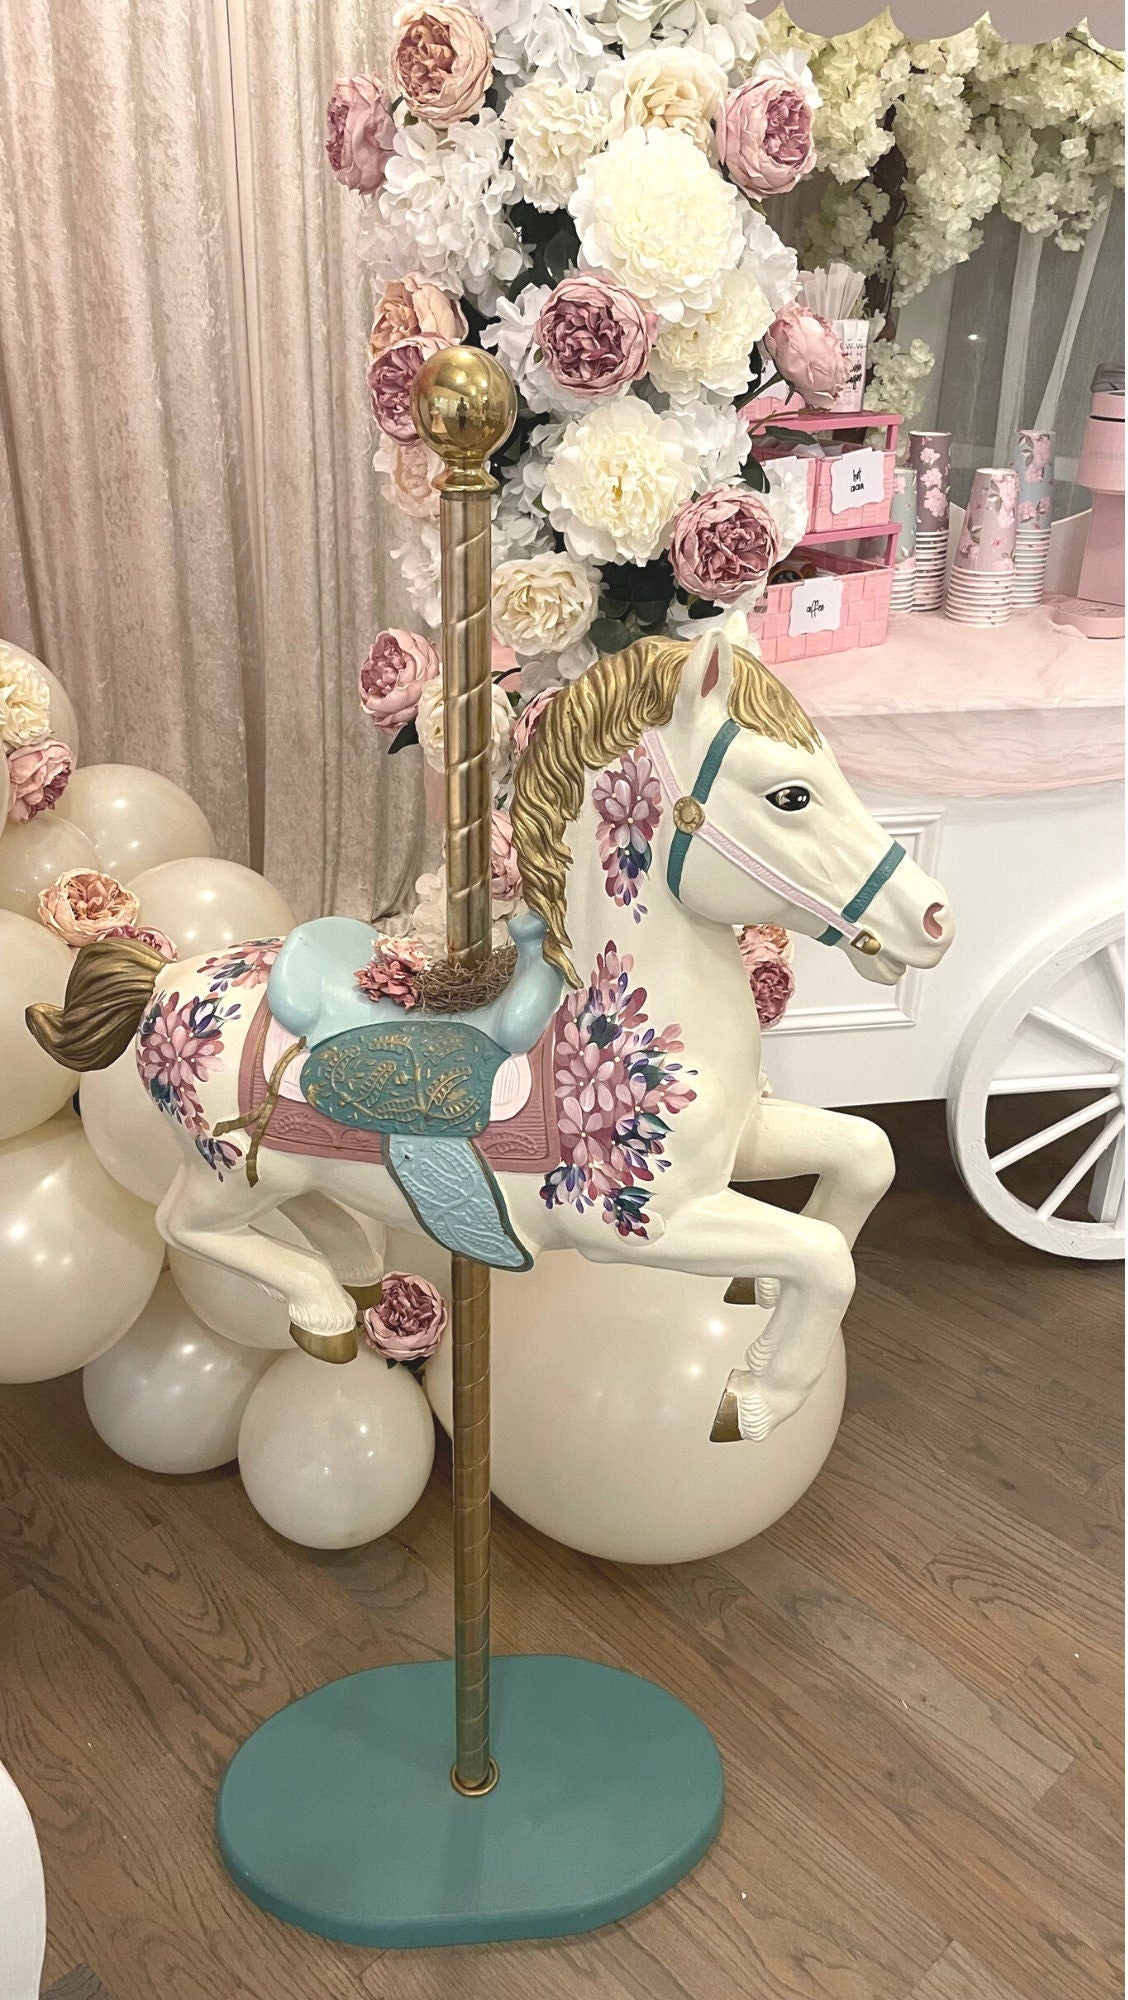 Life Size Carousel Horse For Rent